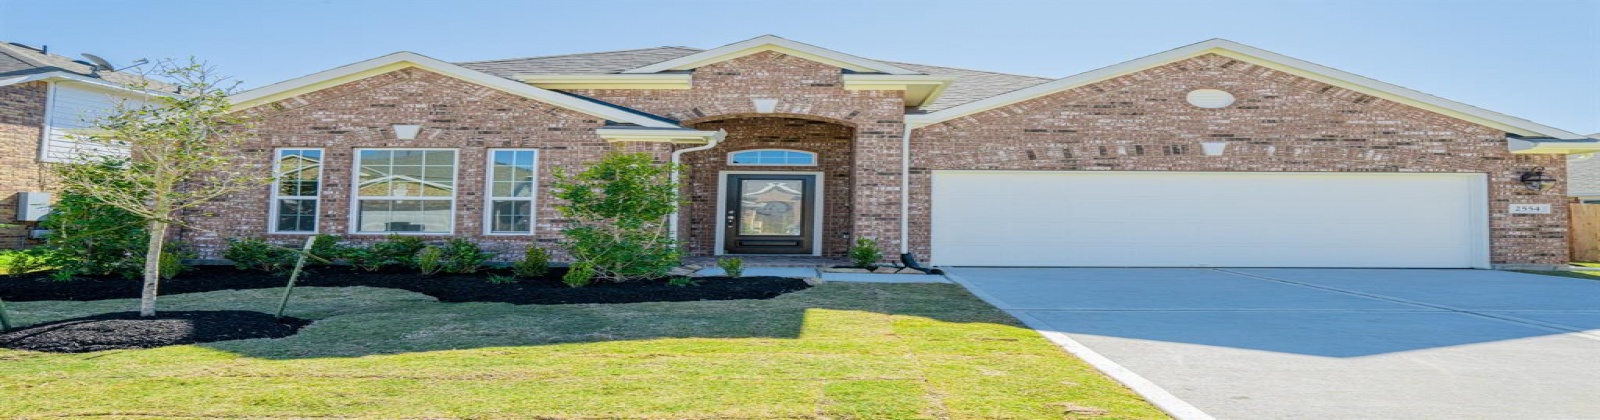 2554 Pines Pointe Drive, Katy, Texas 77493, 3 Bedrooms Bedrooms, ,2 BathroomsBathrooms,1 Story Home,For Sale,Pines Pointe Drive,1013